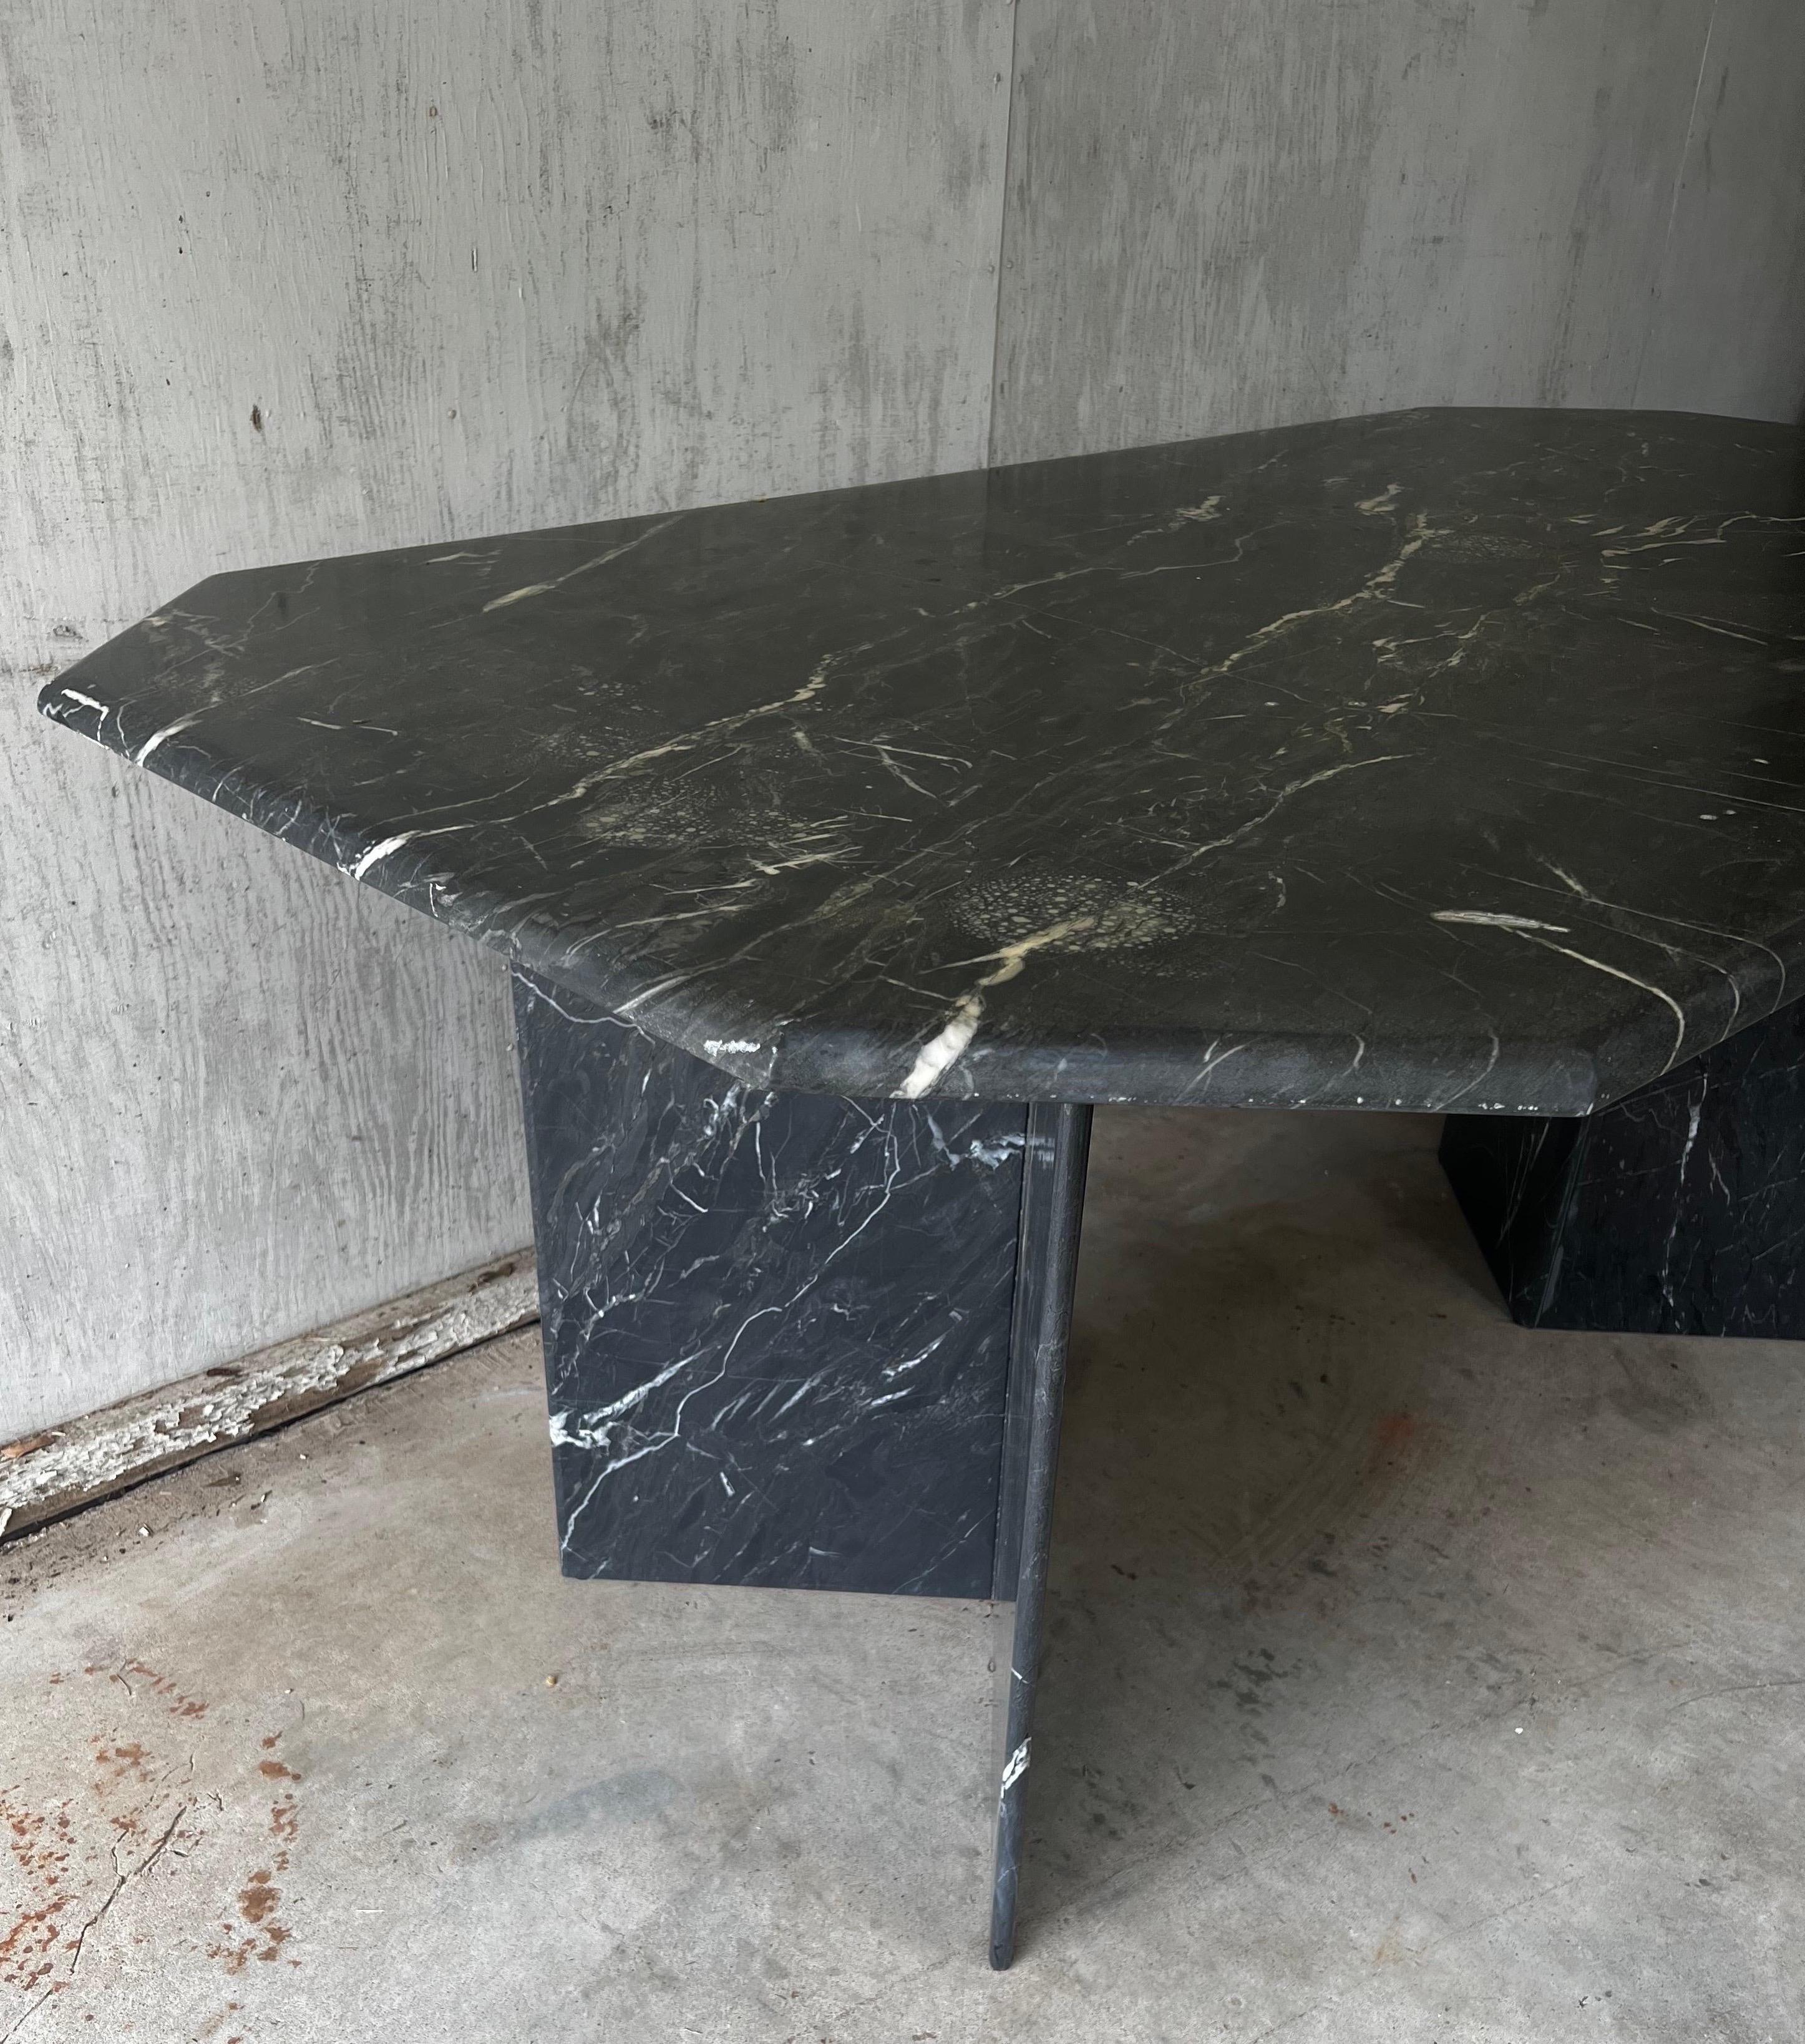 Gorgeous Mid-Century Modern dinging table styled after Angelo Mangiarotti.
Shades of black and grayish/green with white veining. Each corner has a 45-degree angle. 

Could also make a large desk as it sits on two pedestals that could be arranged